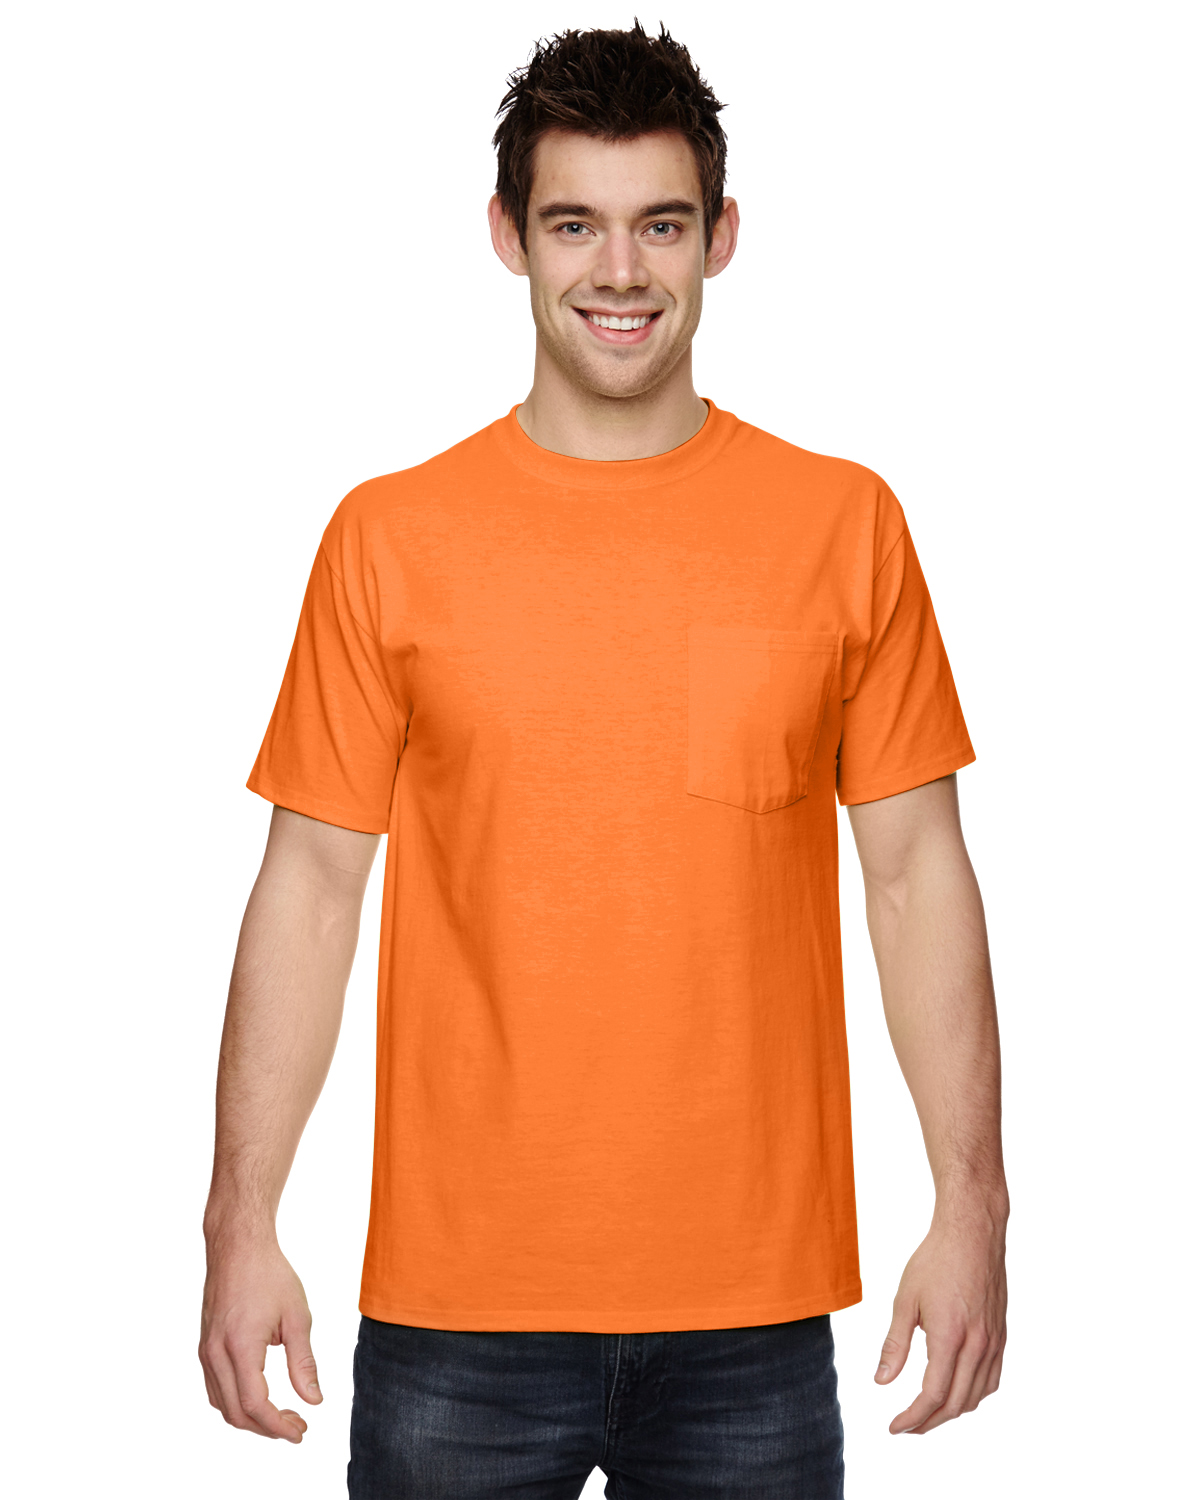 Fruit of the Loom 3930PR Heavy Cotton T-Shirt with a Left Chest Pocket  $5.06 - T-Shirts